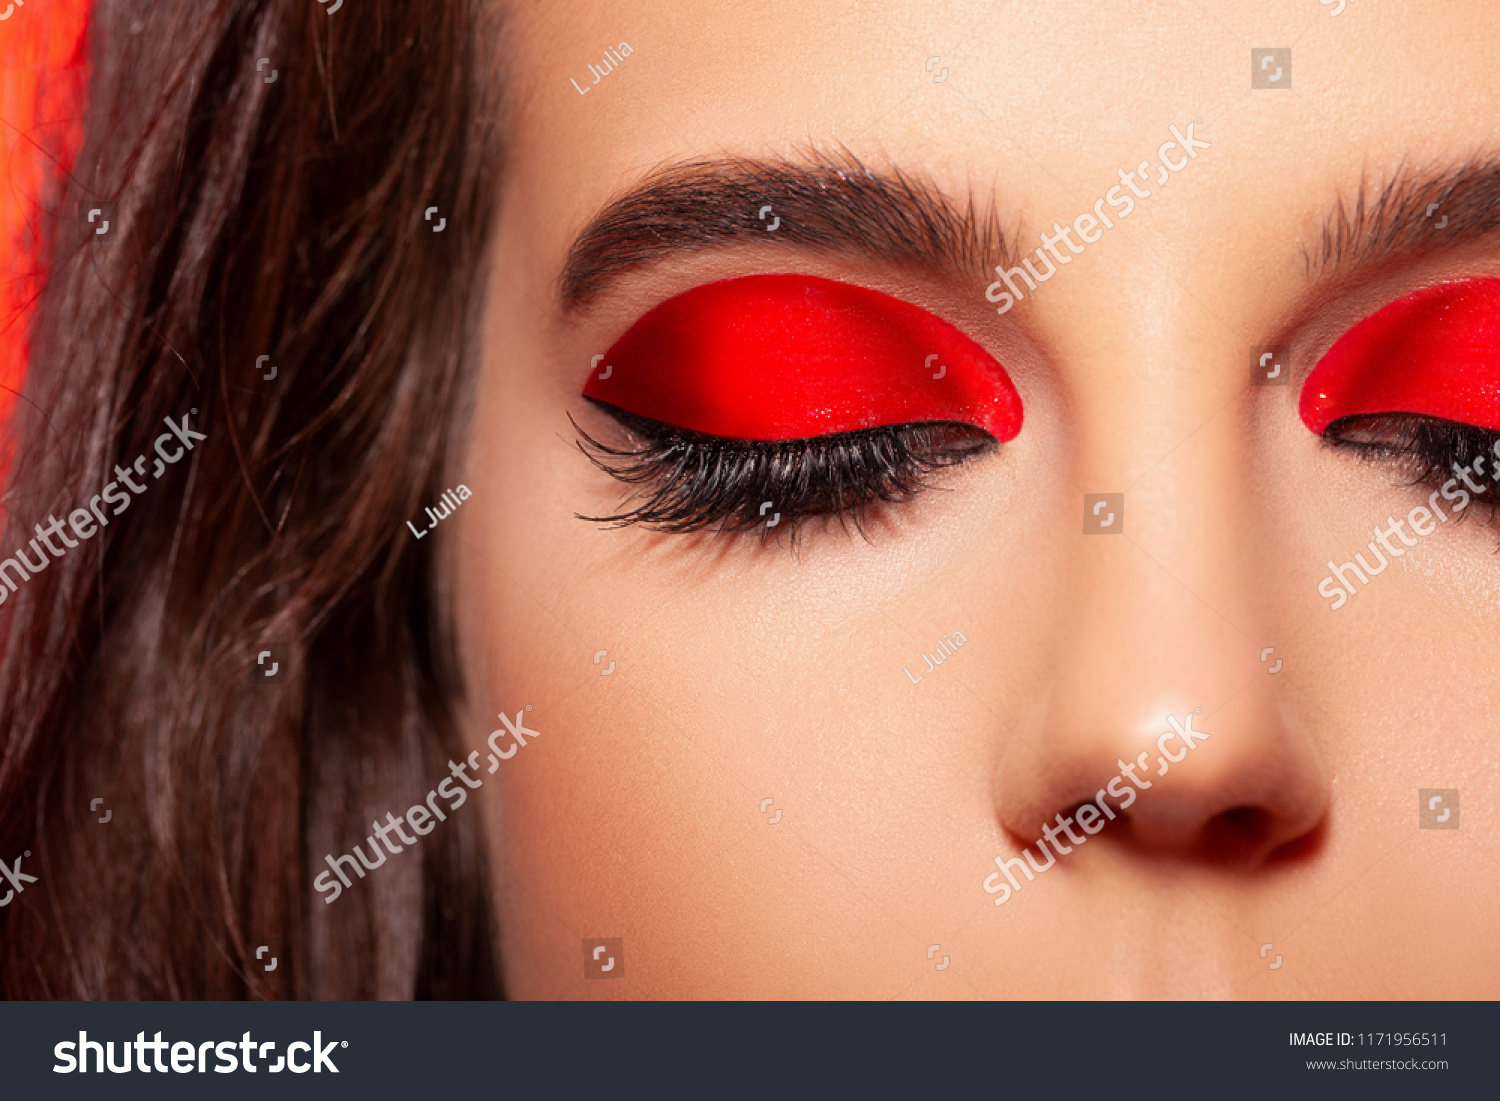 Close Fashion Makeup Beautiful Red Shimmer Stock Photo Edit Now 1171956511